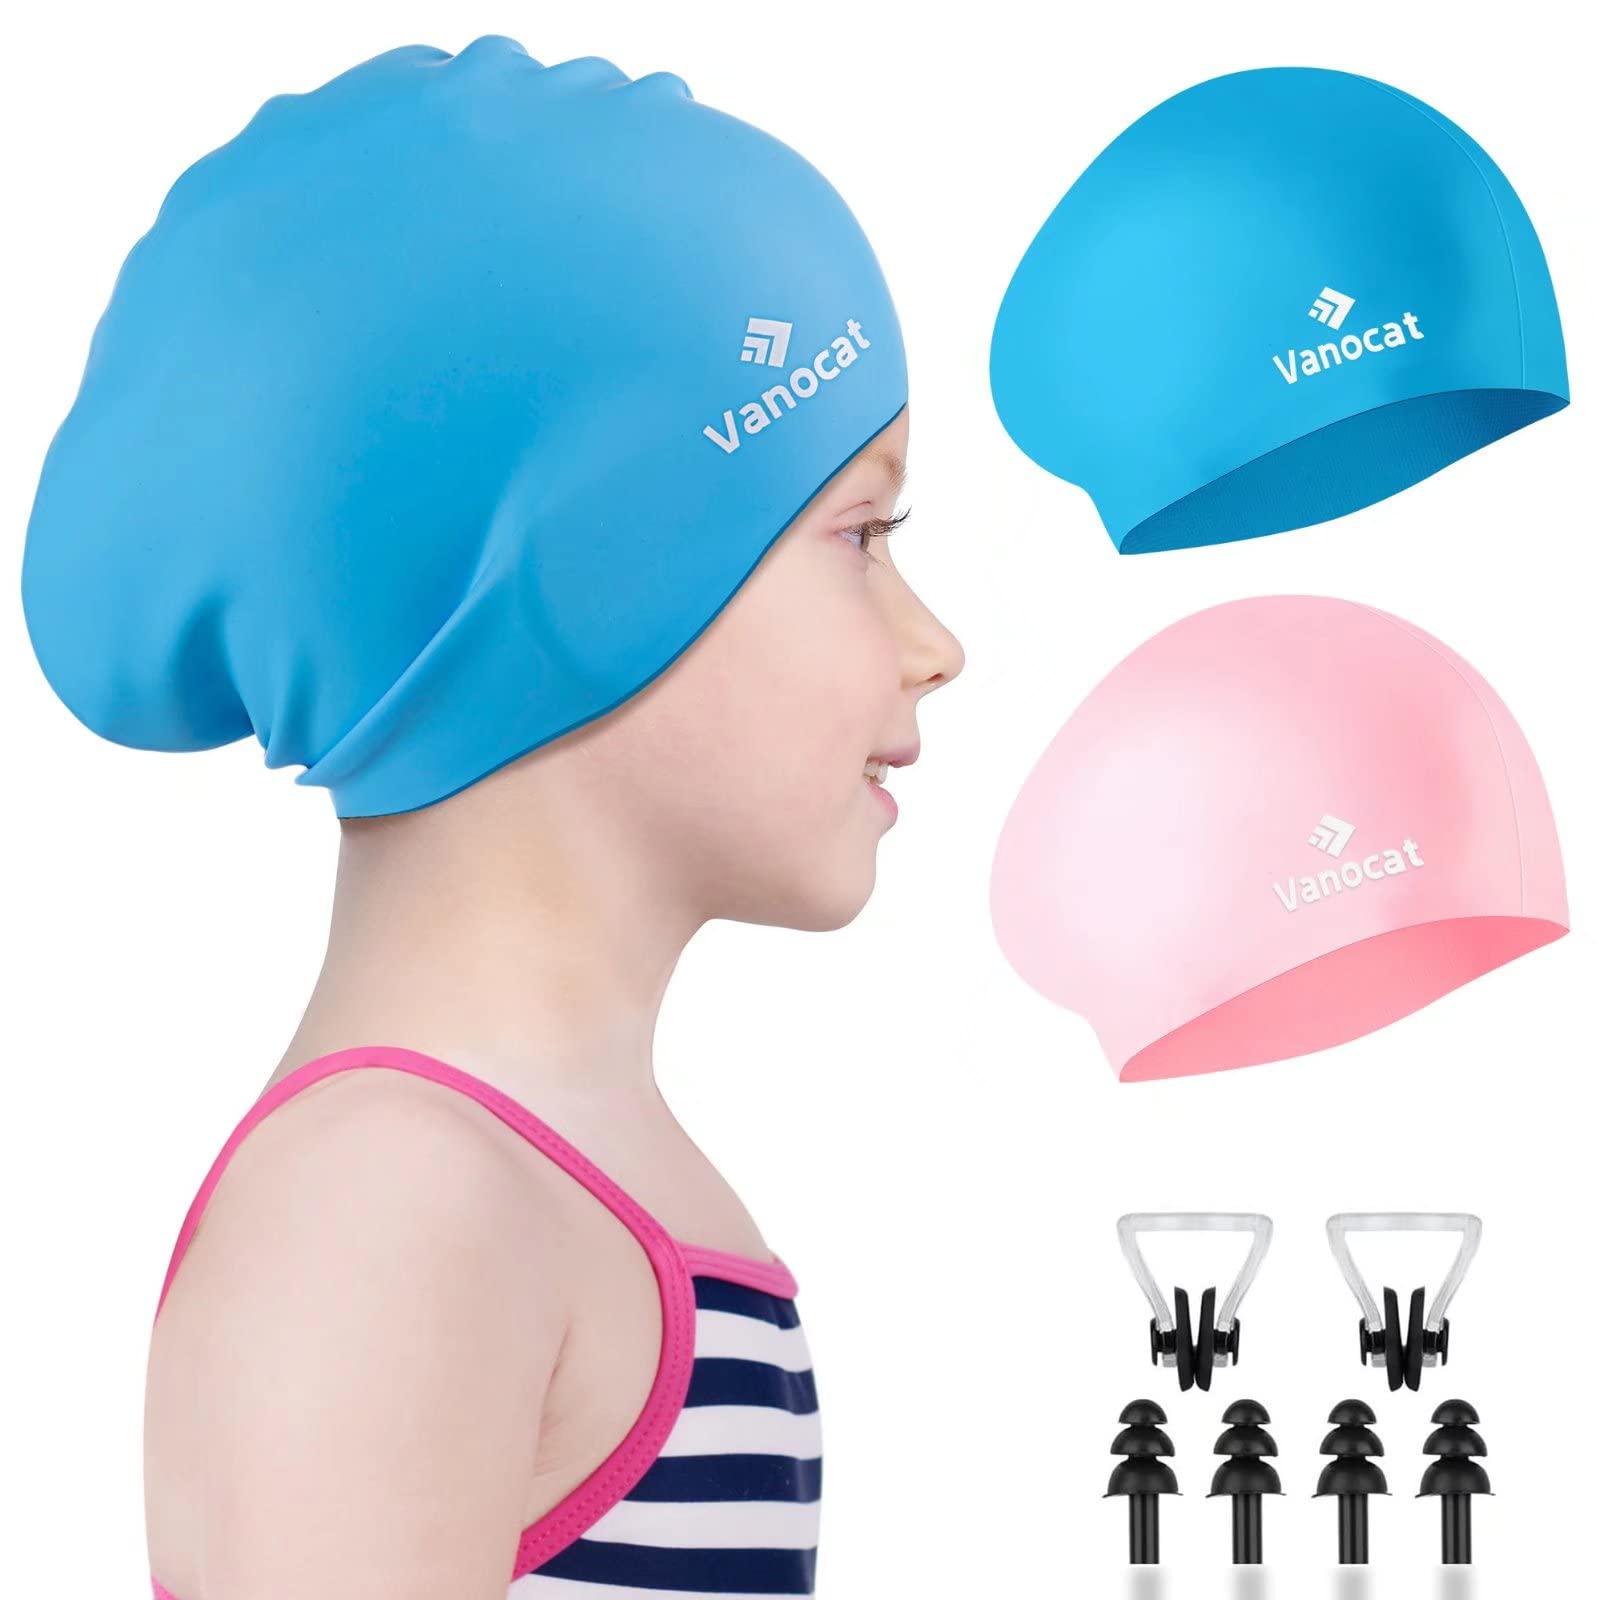 Vanocat 2 Pack Kids Swimming Cap Short/Long Hair, Unisex Silicone Swimming Hat, Waterproof Shower Swim Cap for Girls Boys with Ear Plugs & Nose Clip（Pink+Sky Blue）, Age 8-15-